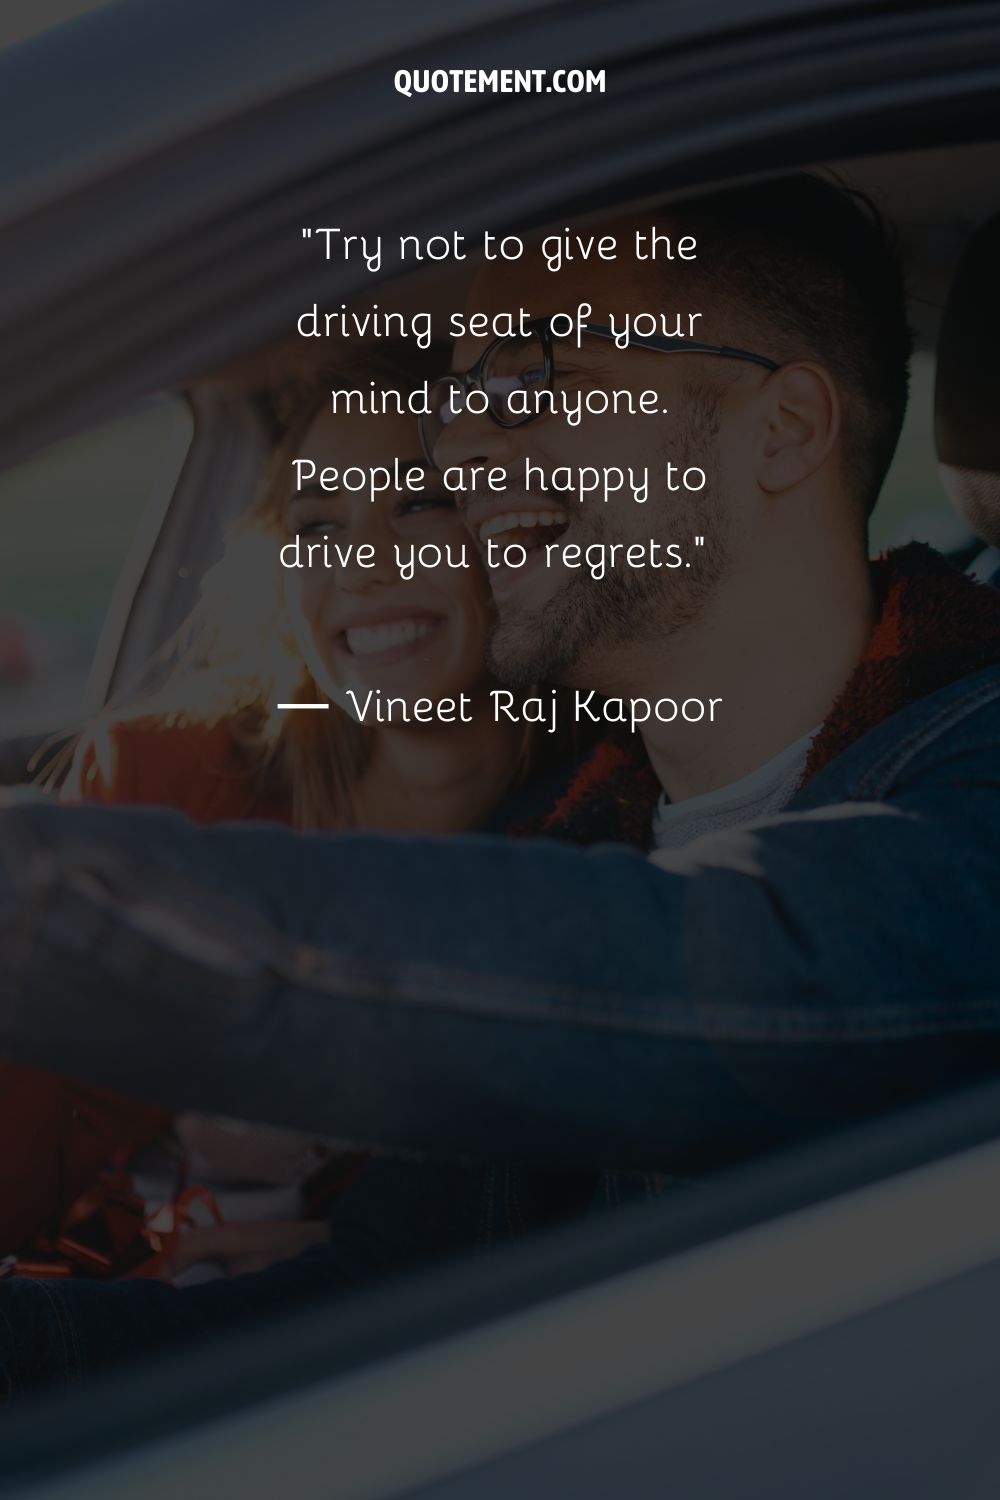 Try not to give the driving seat of your mind to anyone. People are happy to drive you to regrets.